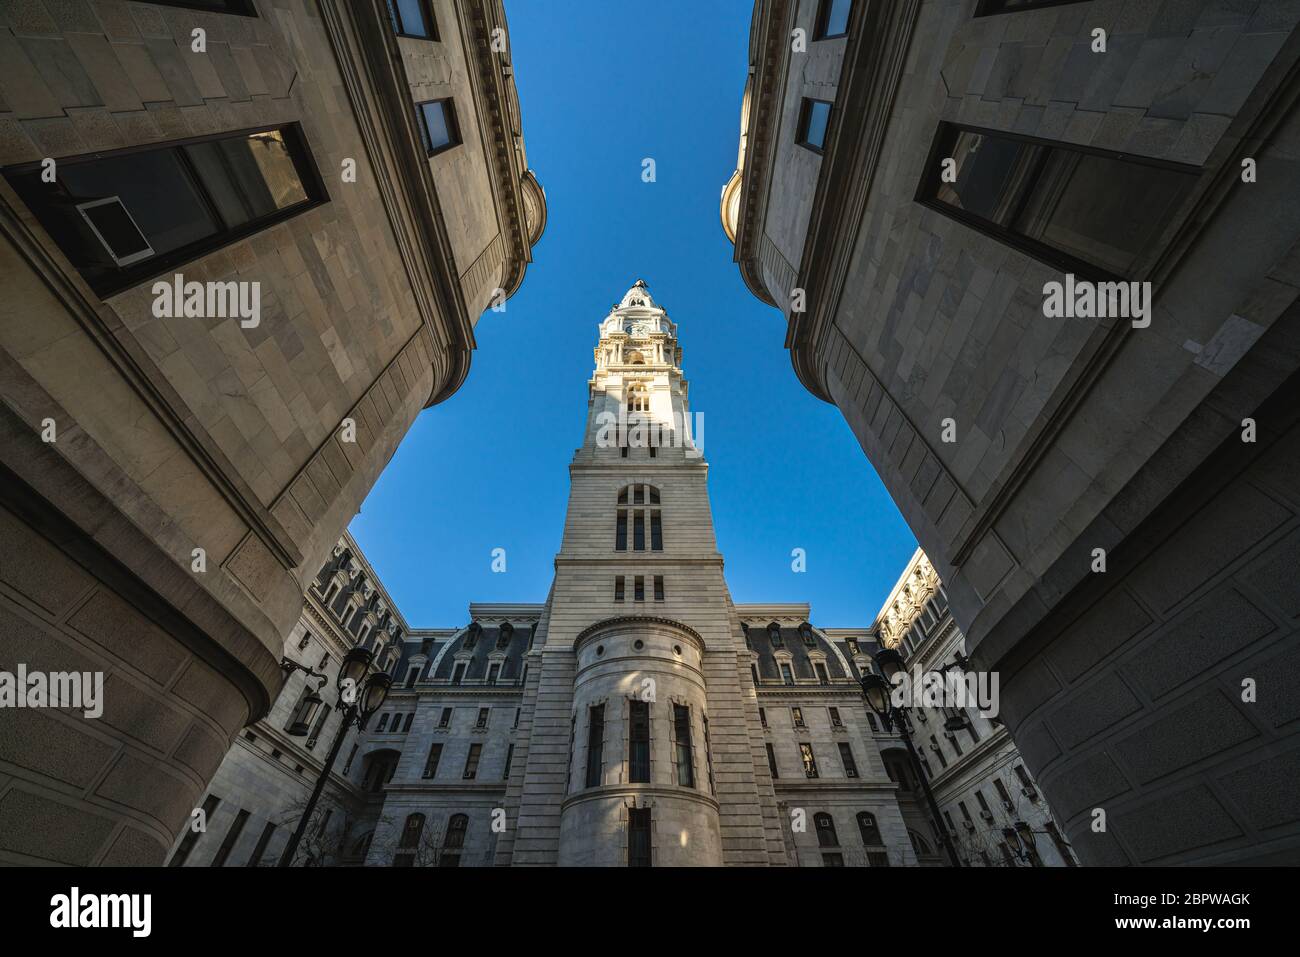 Uprisen angle of Philadelphia city hall with historic building over blue sky background, Pennsylvania, USA or United States of America, Architecture a Stock Photo